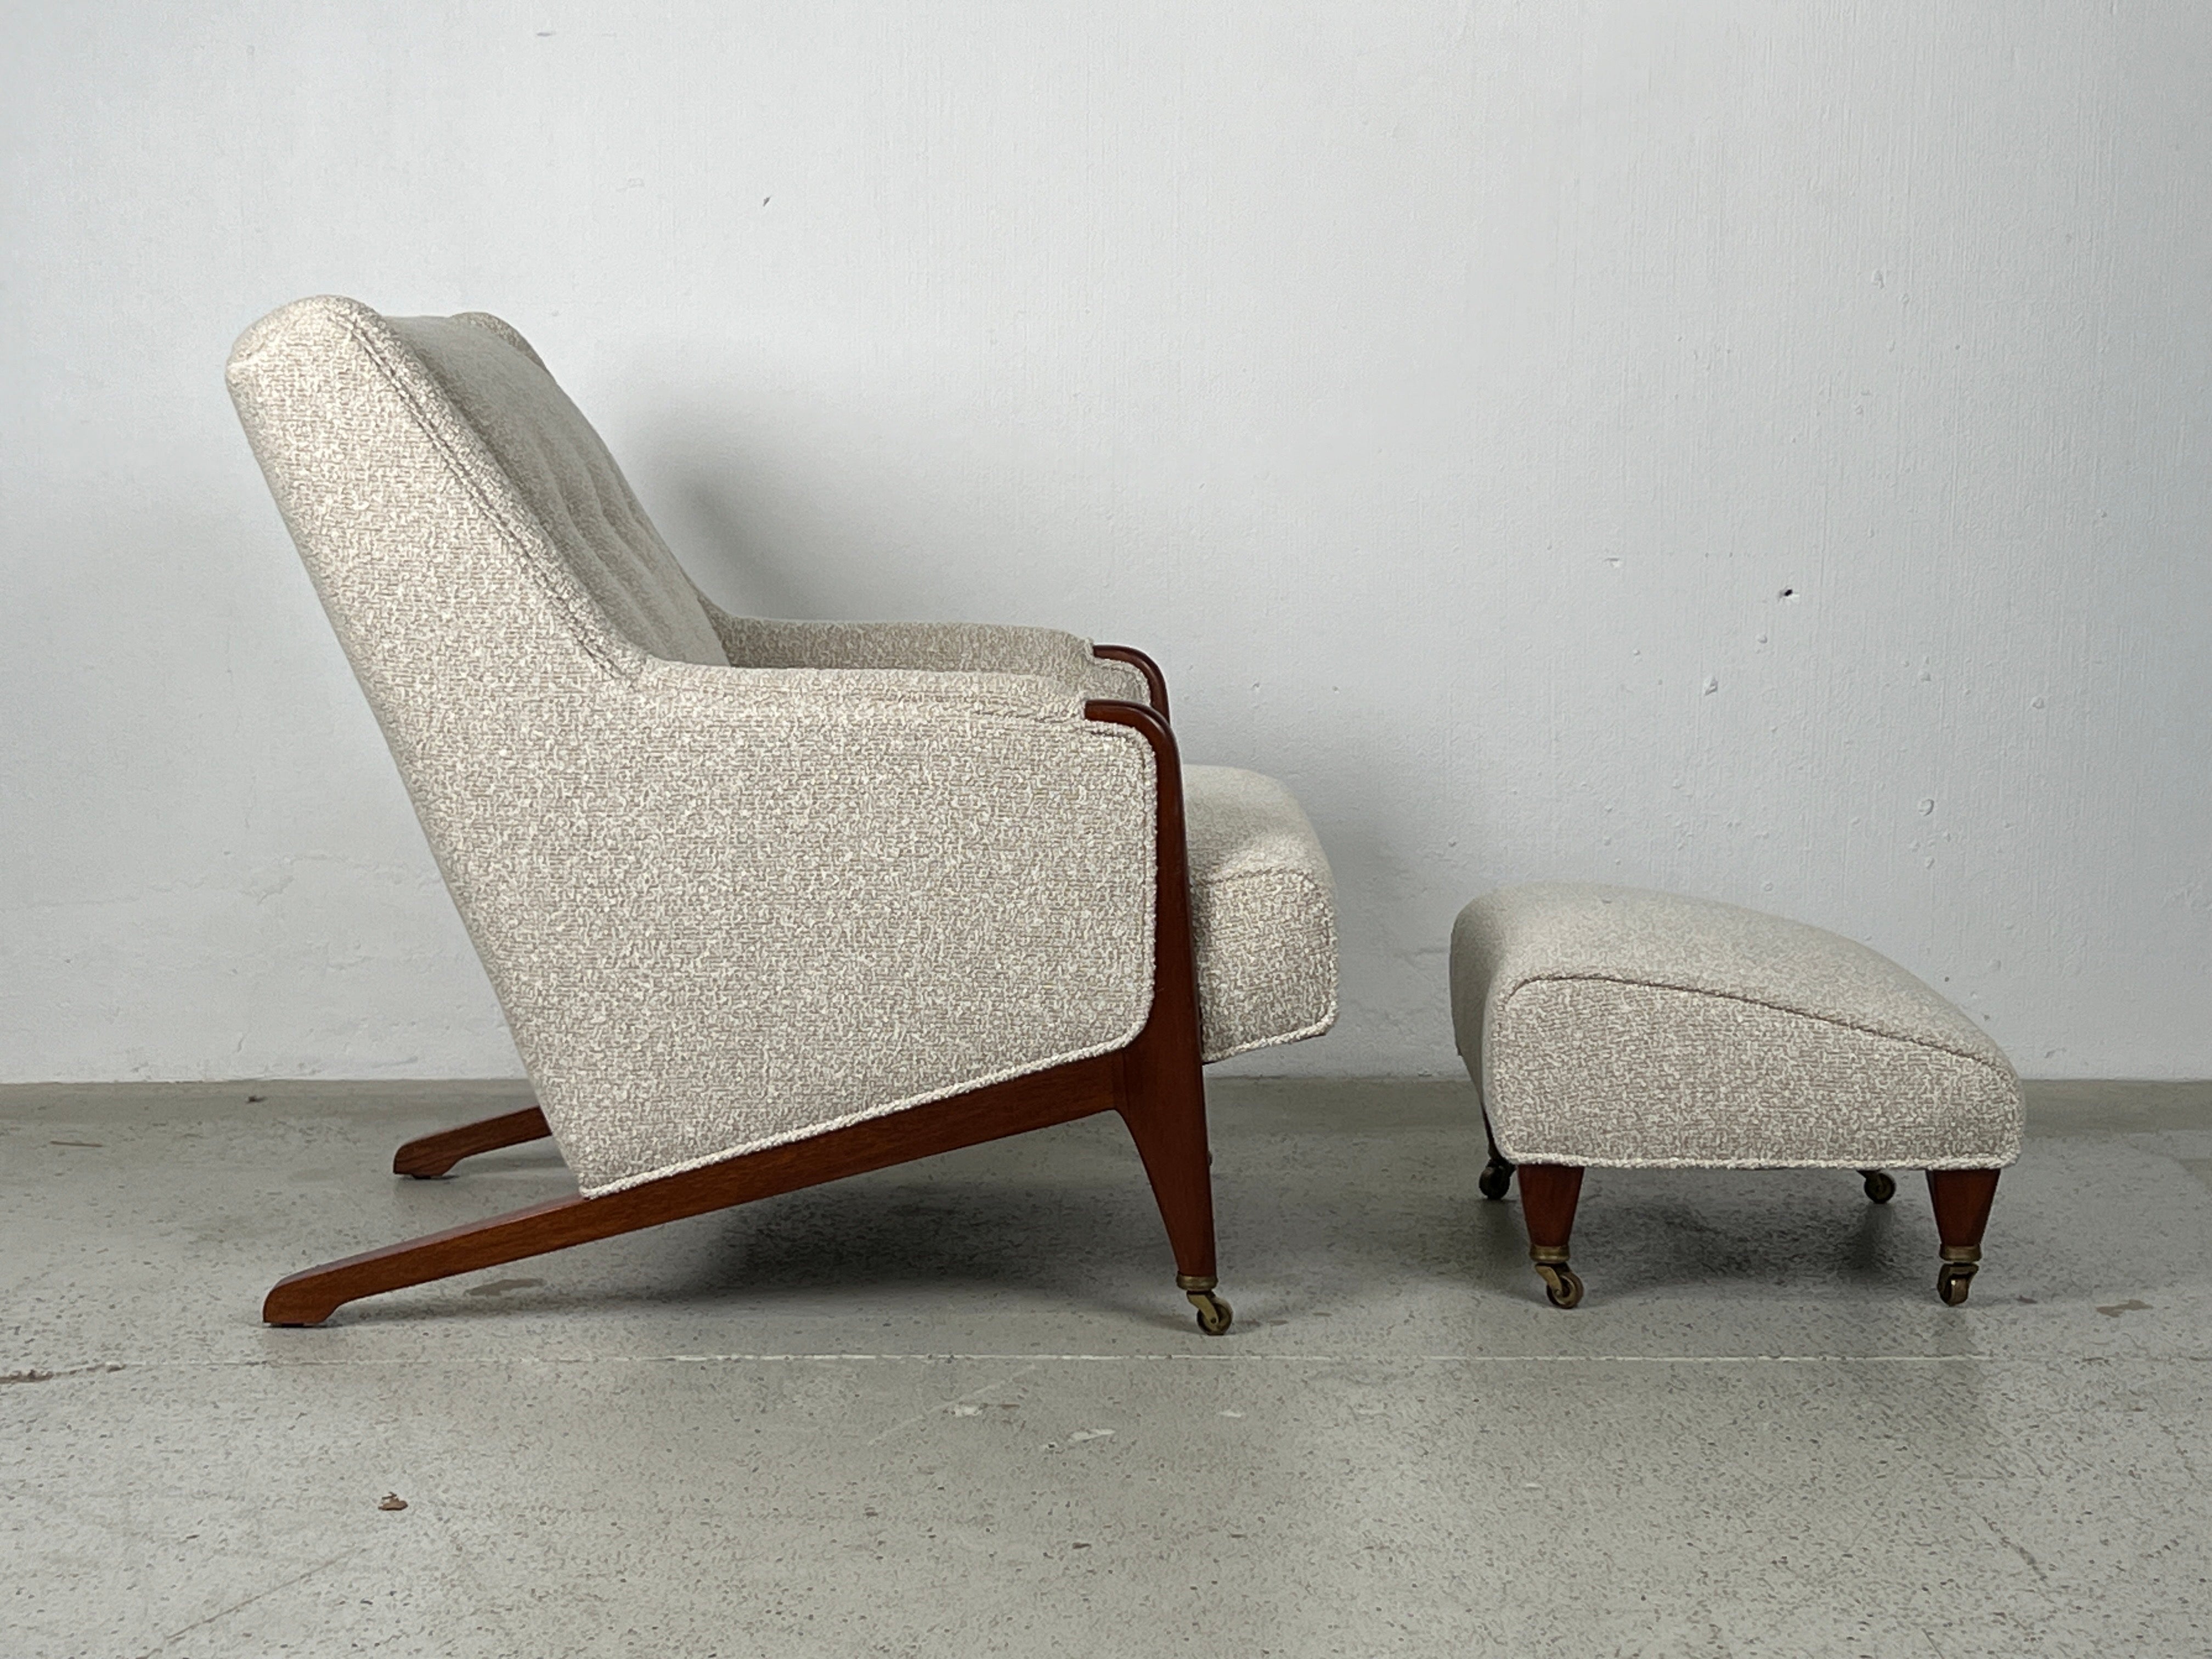 A rare lounge chair and ottoman with mahogany legs and brass casters. Designed by Edward Wormley for Dunbar. Reupholstered in Holly Hunt fabric. 